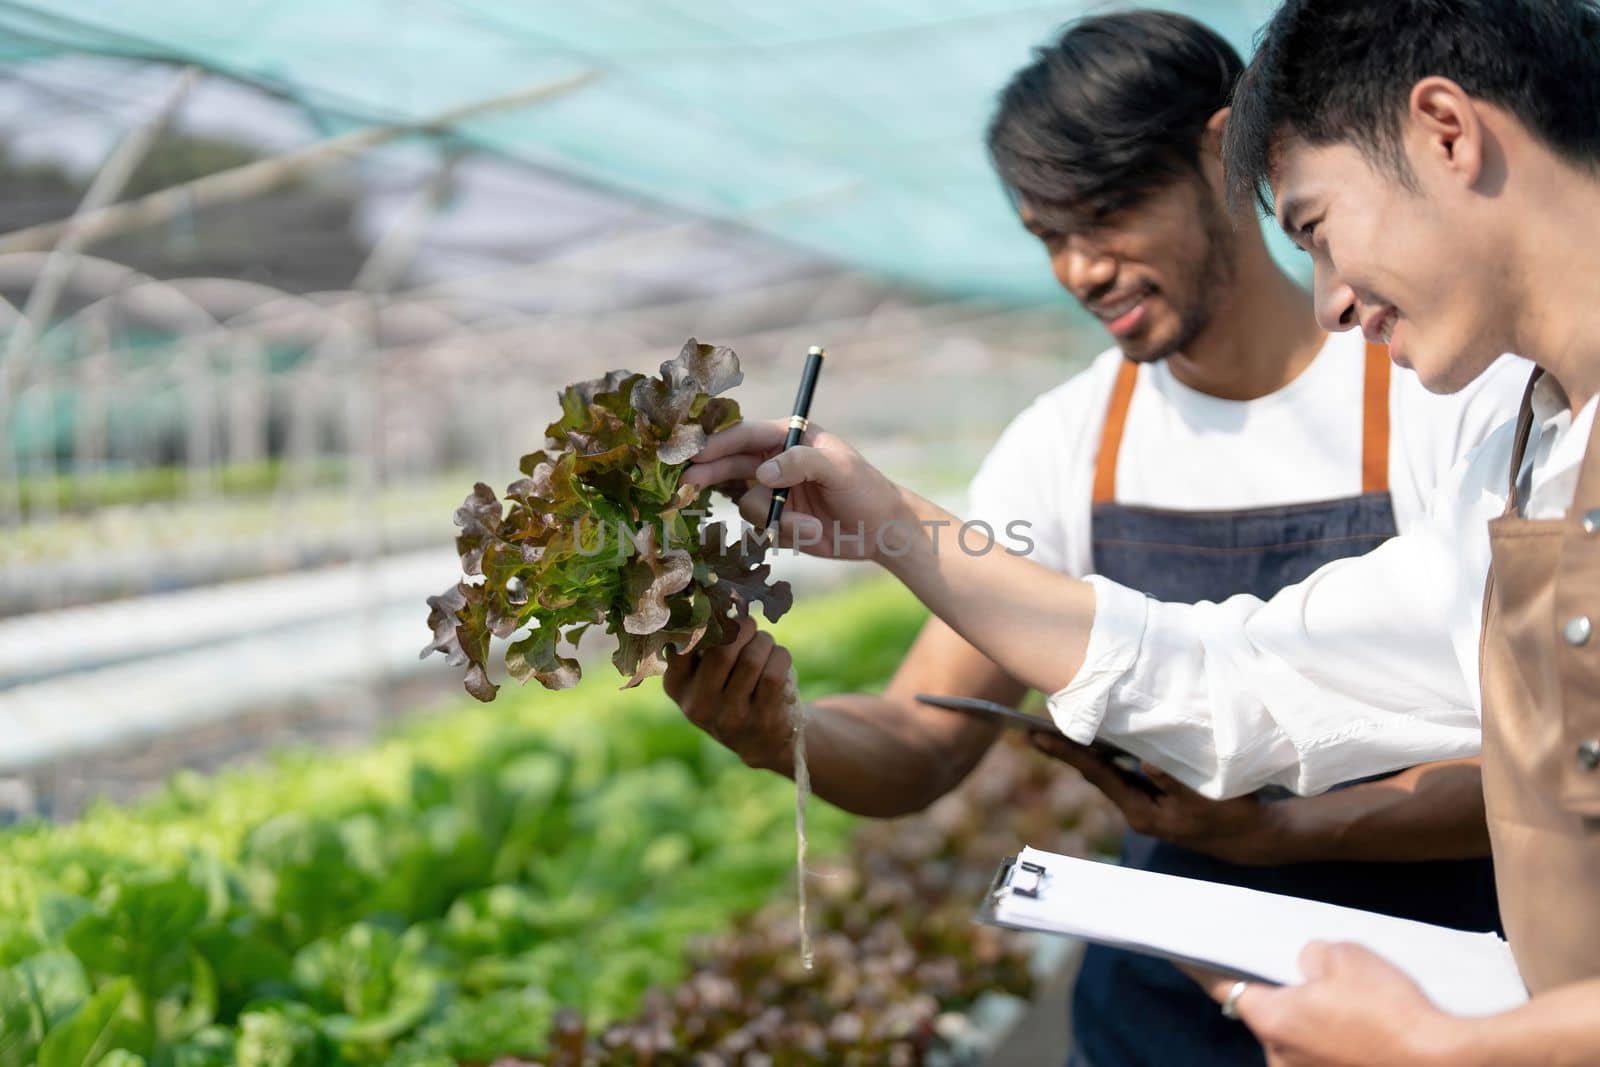 Attractive agriculturists harvesting green oak and lettuce together at green house farm. Asian farmers work in vegetables hydroponic farm with happiness.